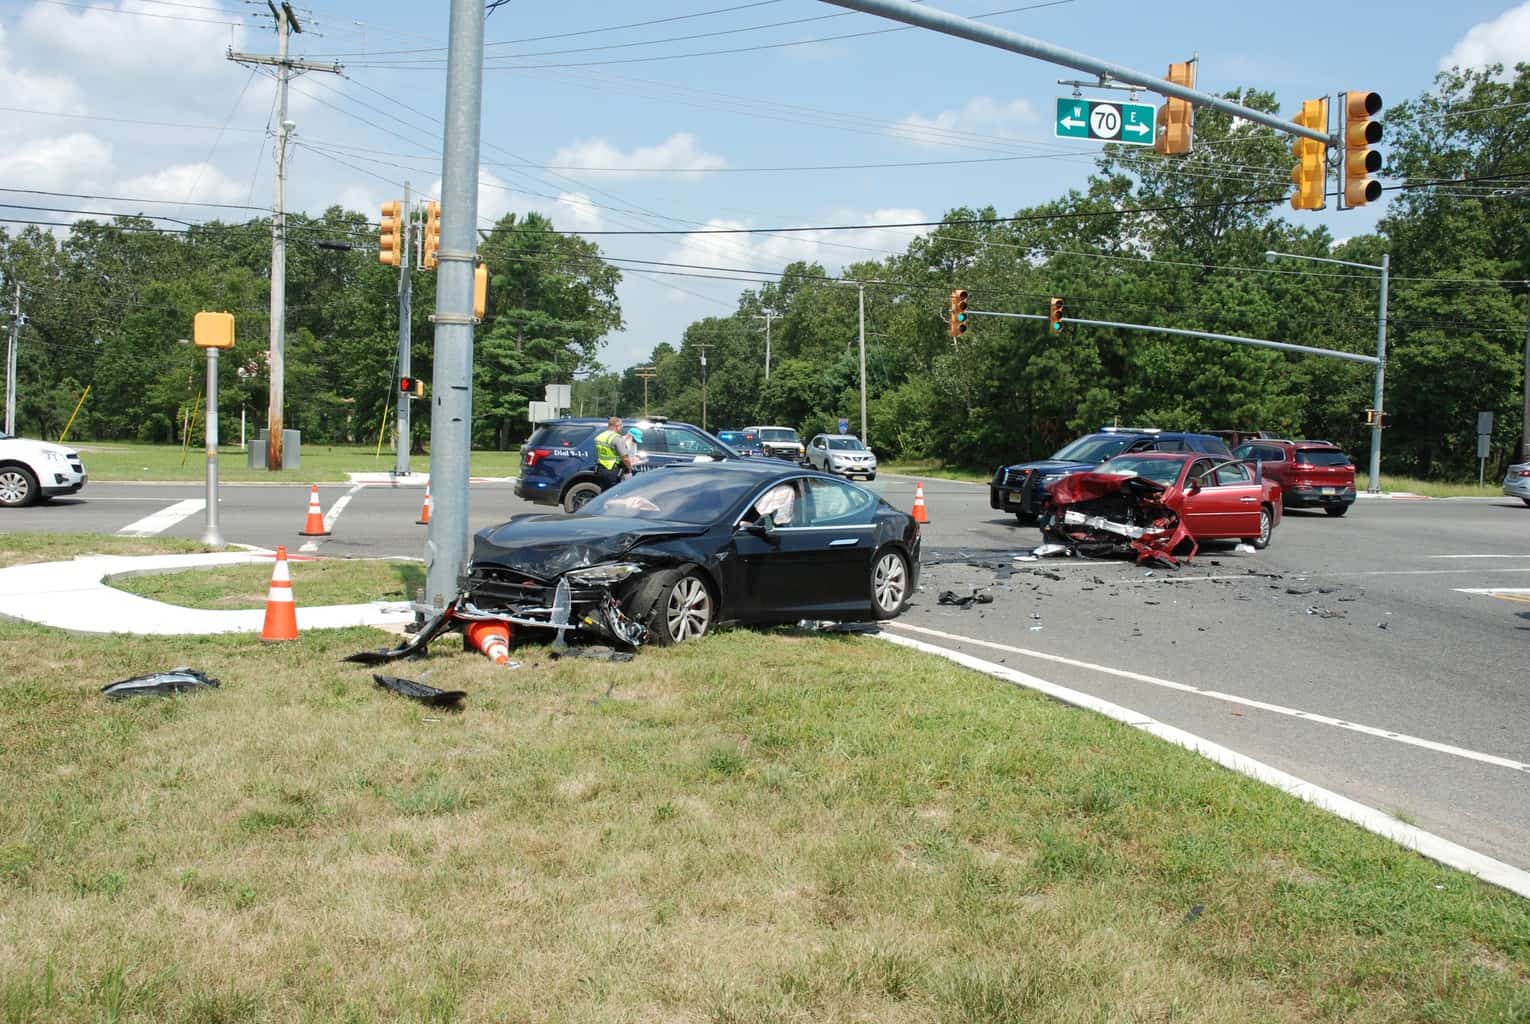 Head-On Crash With Injuries At Dangerous Intersection | Jersey Shore Online